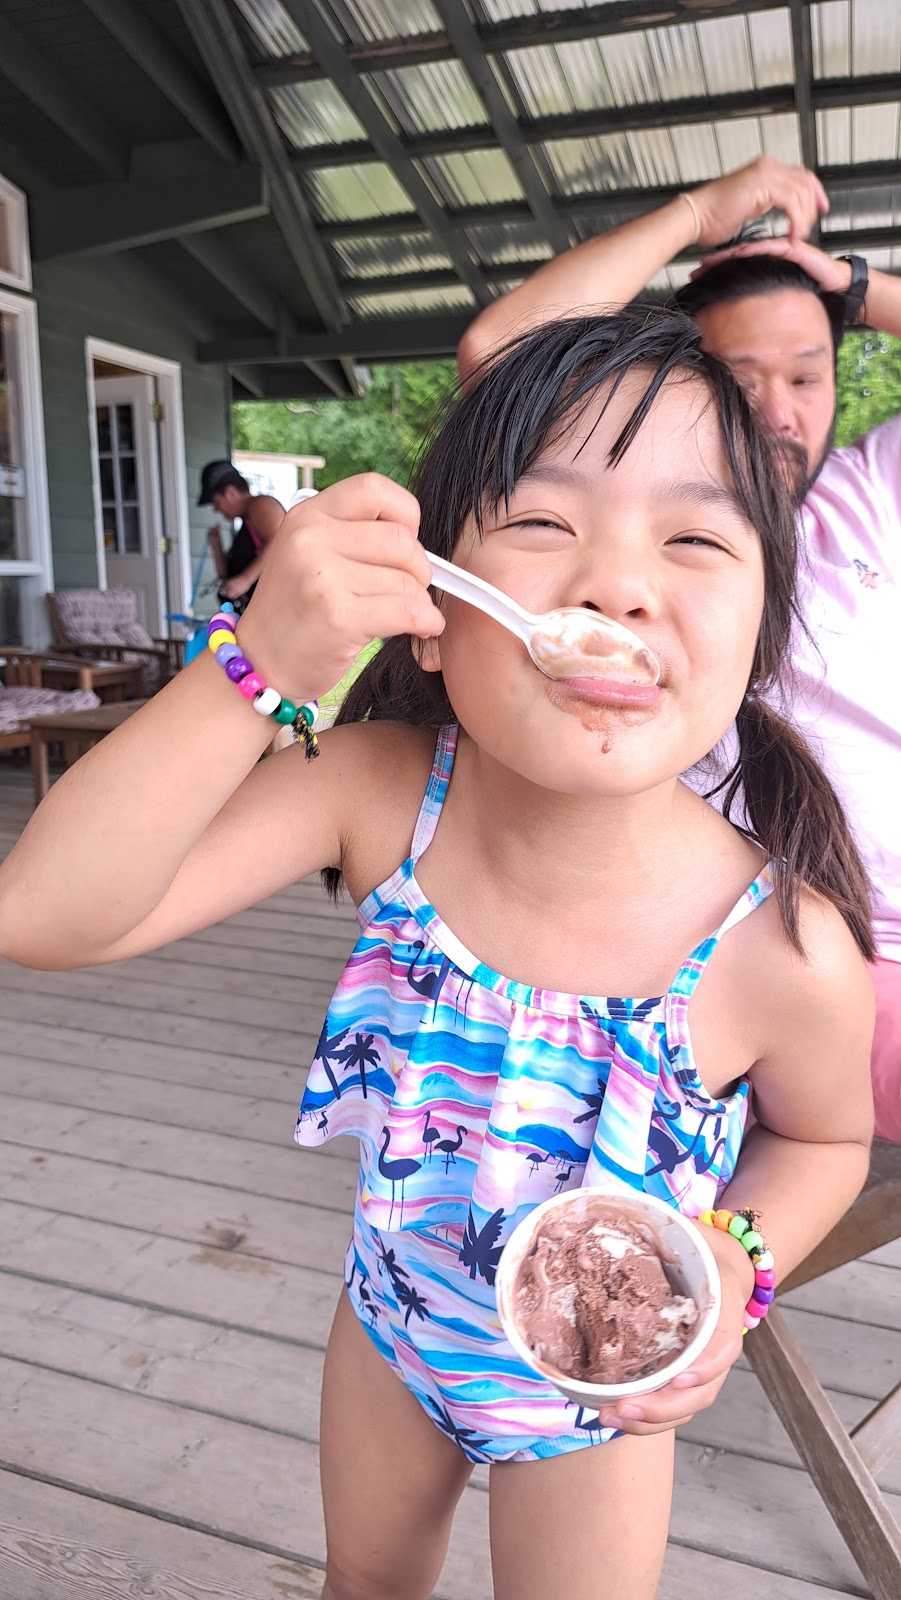 Hope Bay Ice Cream and General Store | cafe | 2 Hope Bay Rd, Wiarton, ON N0H 2T0, Canada | 5195341208 OR +1 519-534-1208